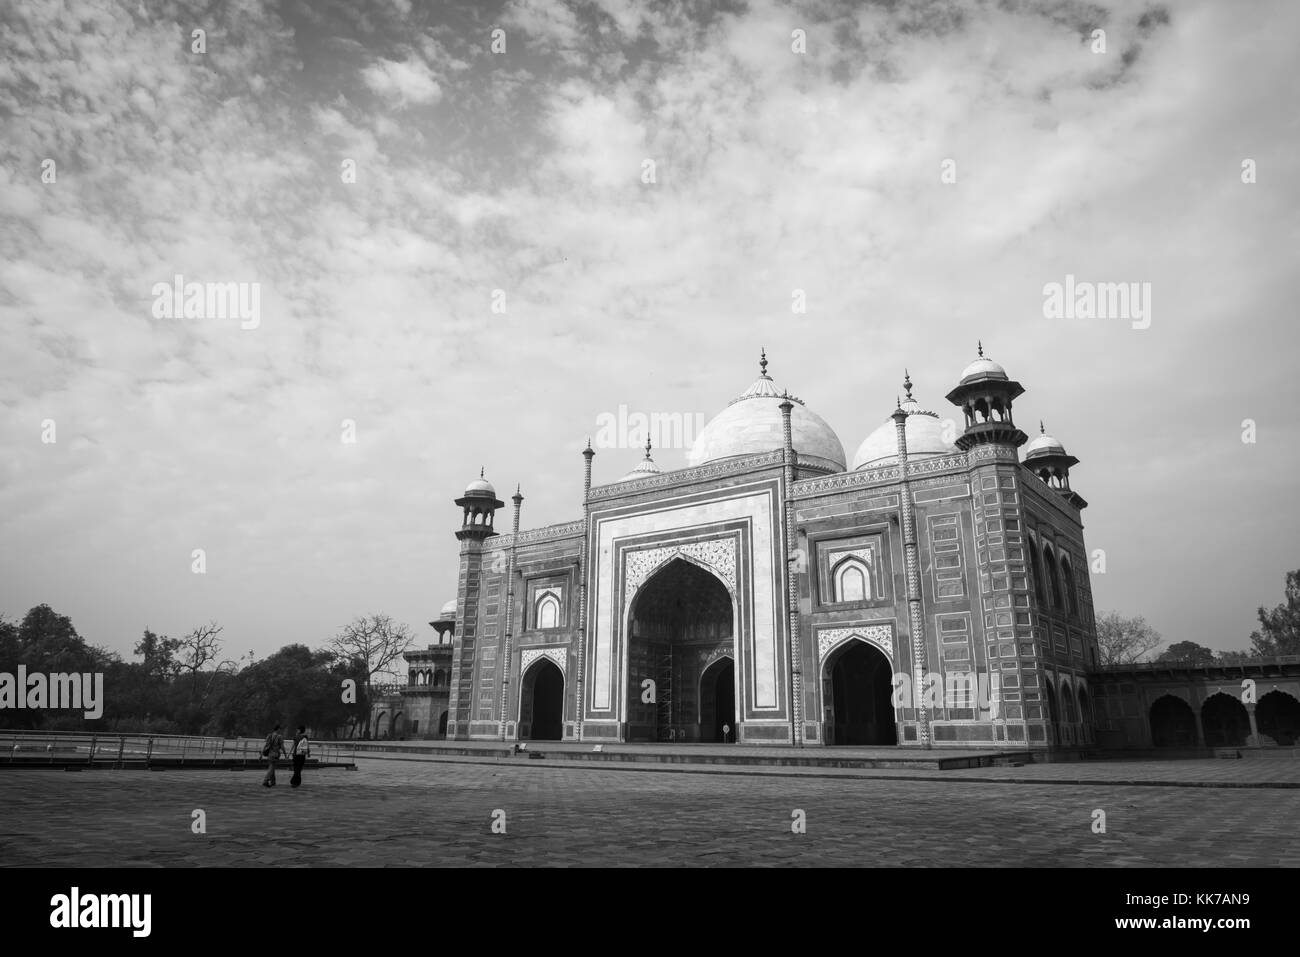 AGRA, INDIA - MARCH 17, 2016: Black and white picture of Mughal ...